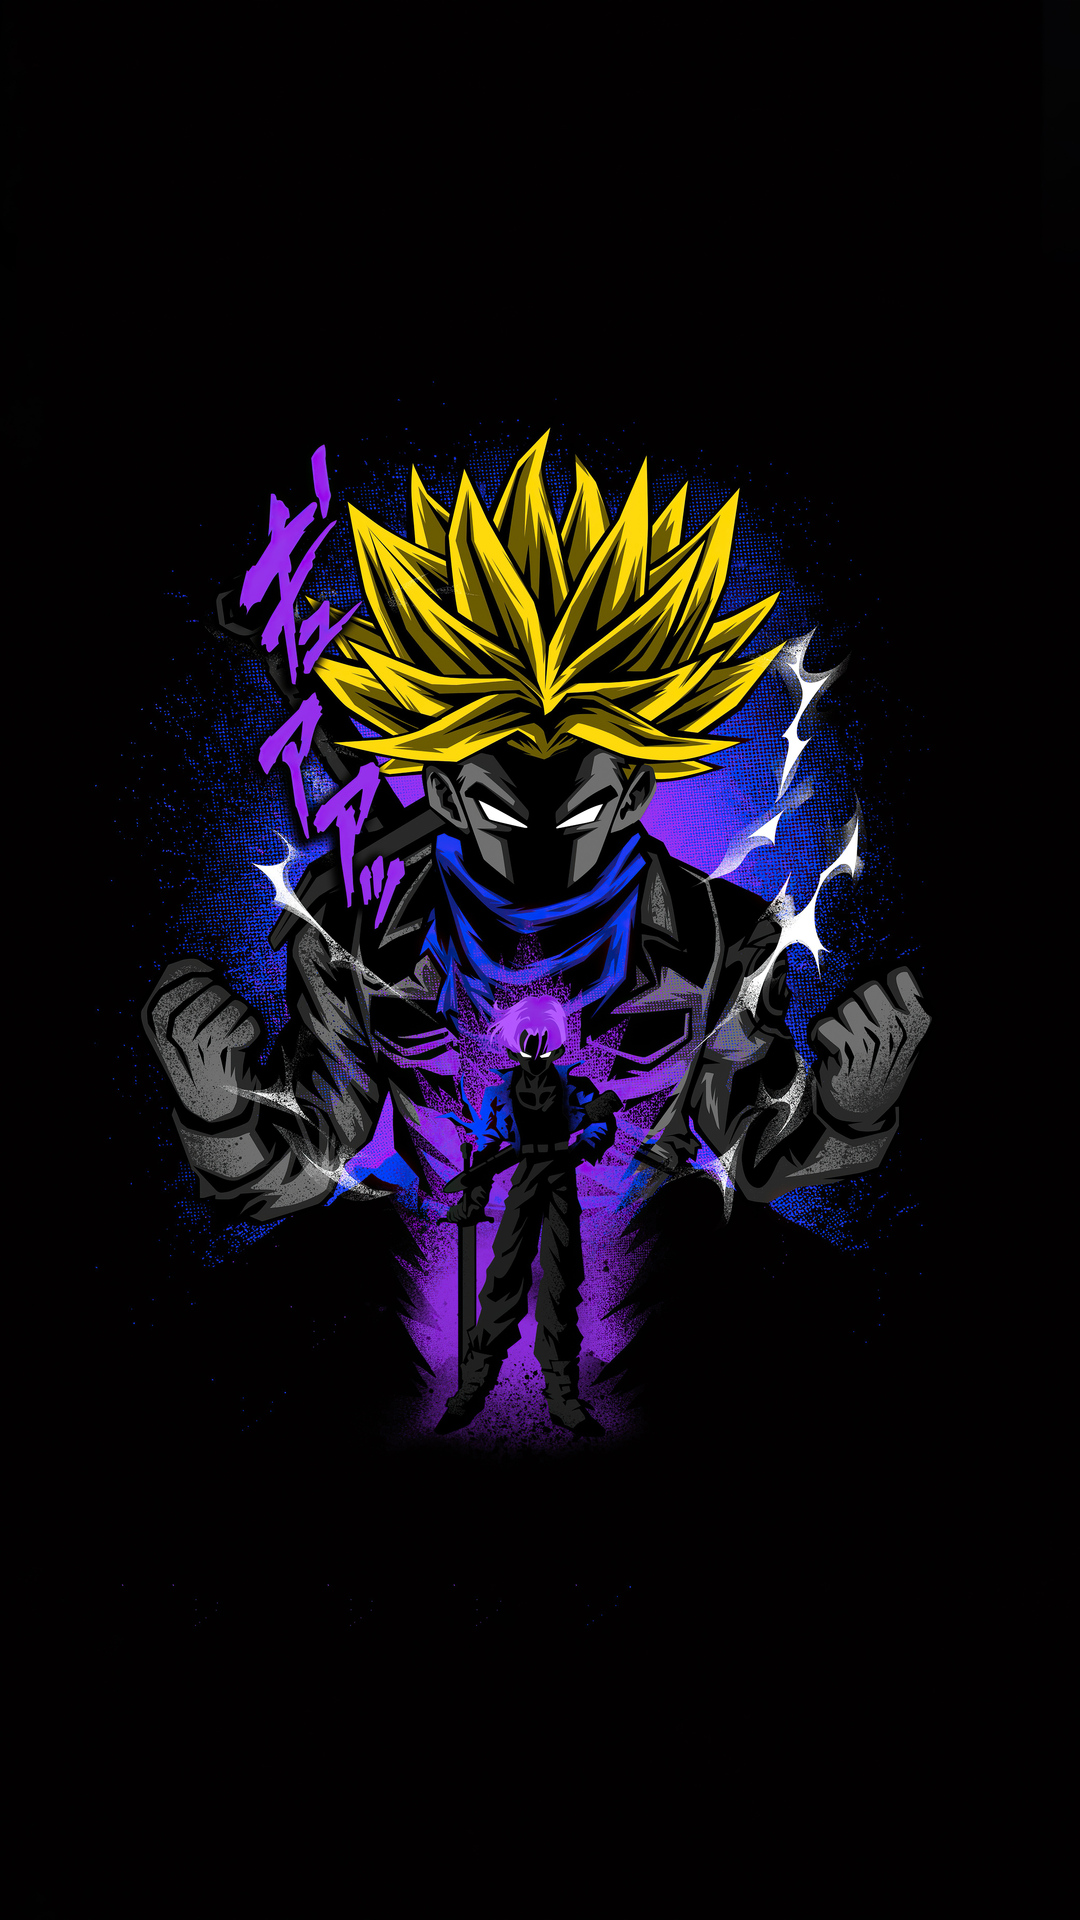 1080x1920 Trunks Dragon Ball Super 5k Iphone 7,6s,6 Plus, Pixel xl ,One  Plus 3,3t,5 HD 4k Wallpapers, Images, Backgrounds, Photos and Pictures